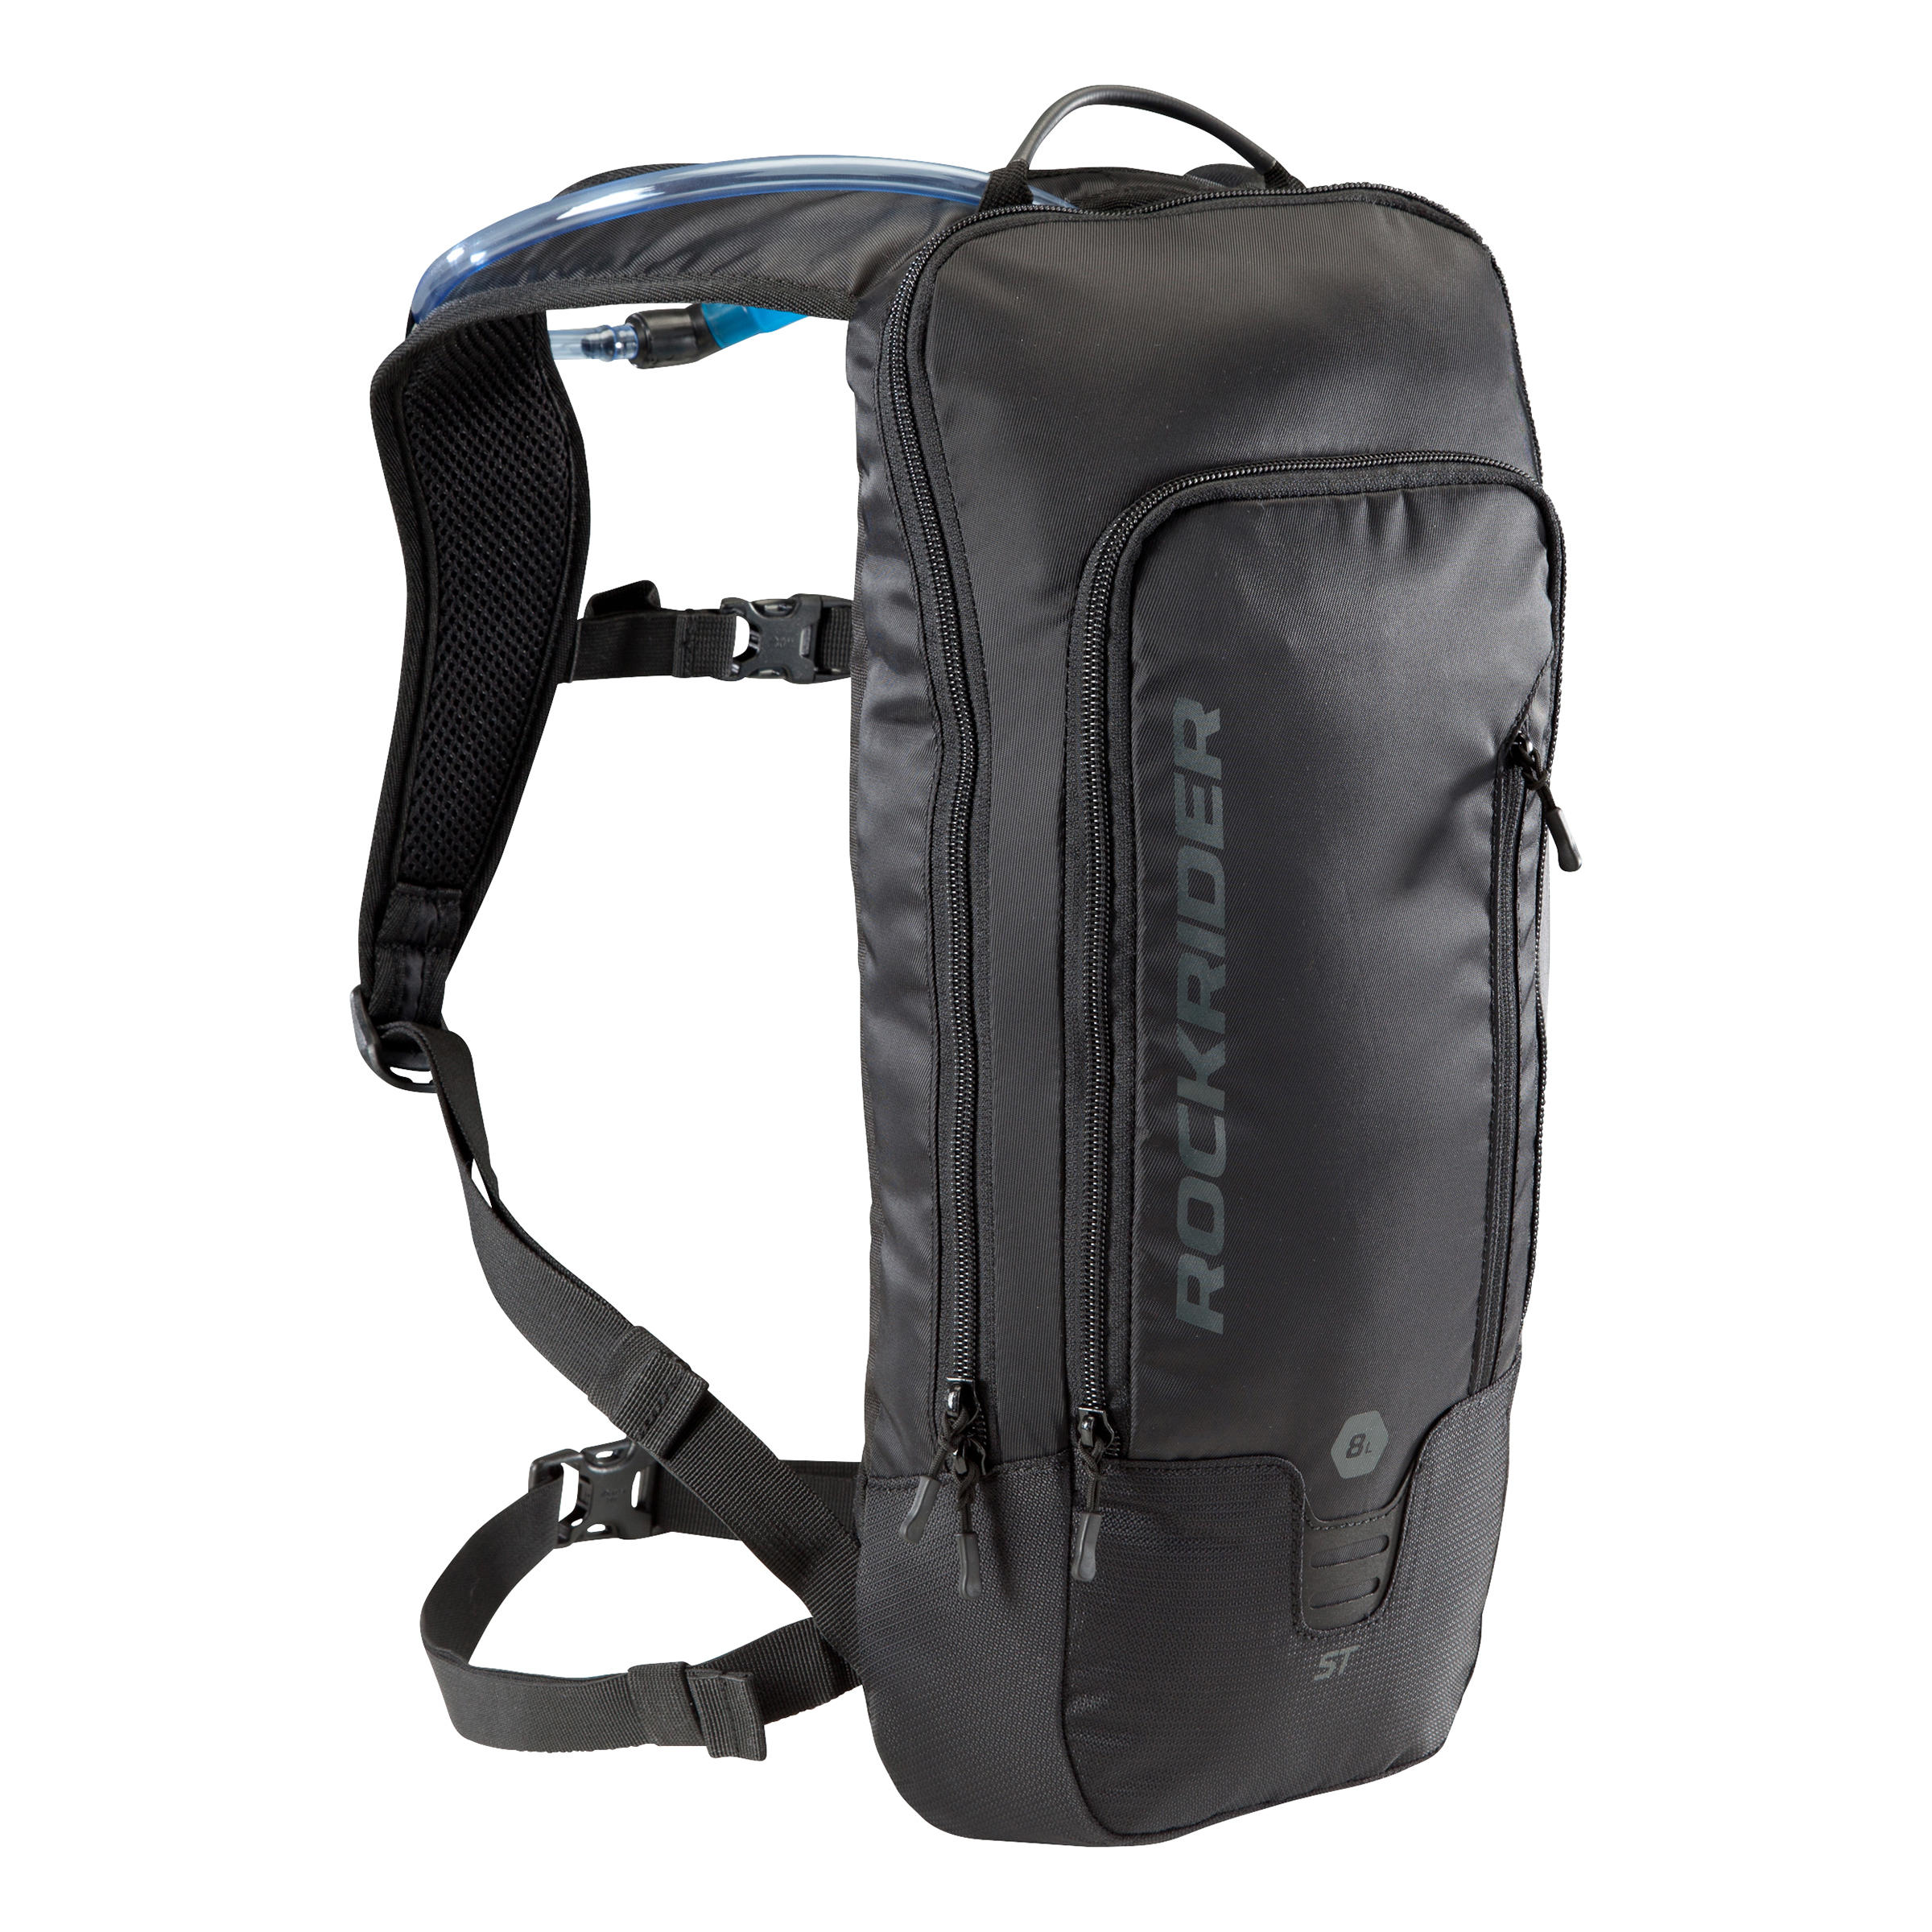 Cycling Accessories: Hydration Bag 500 